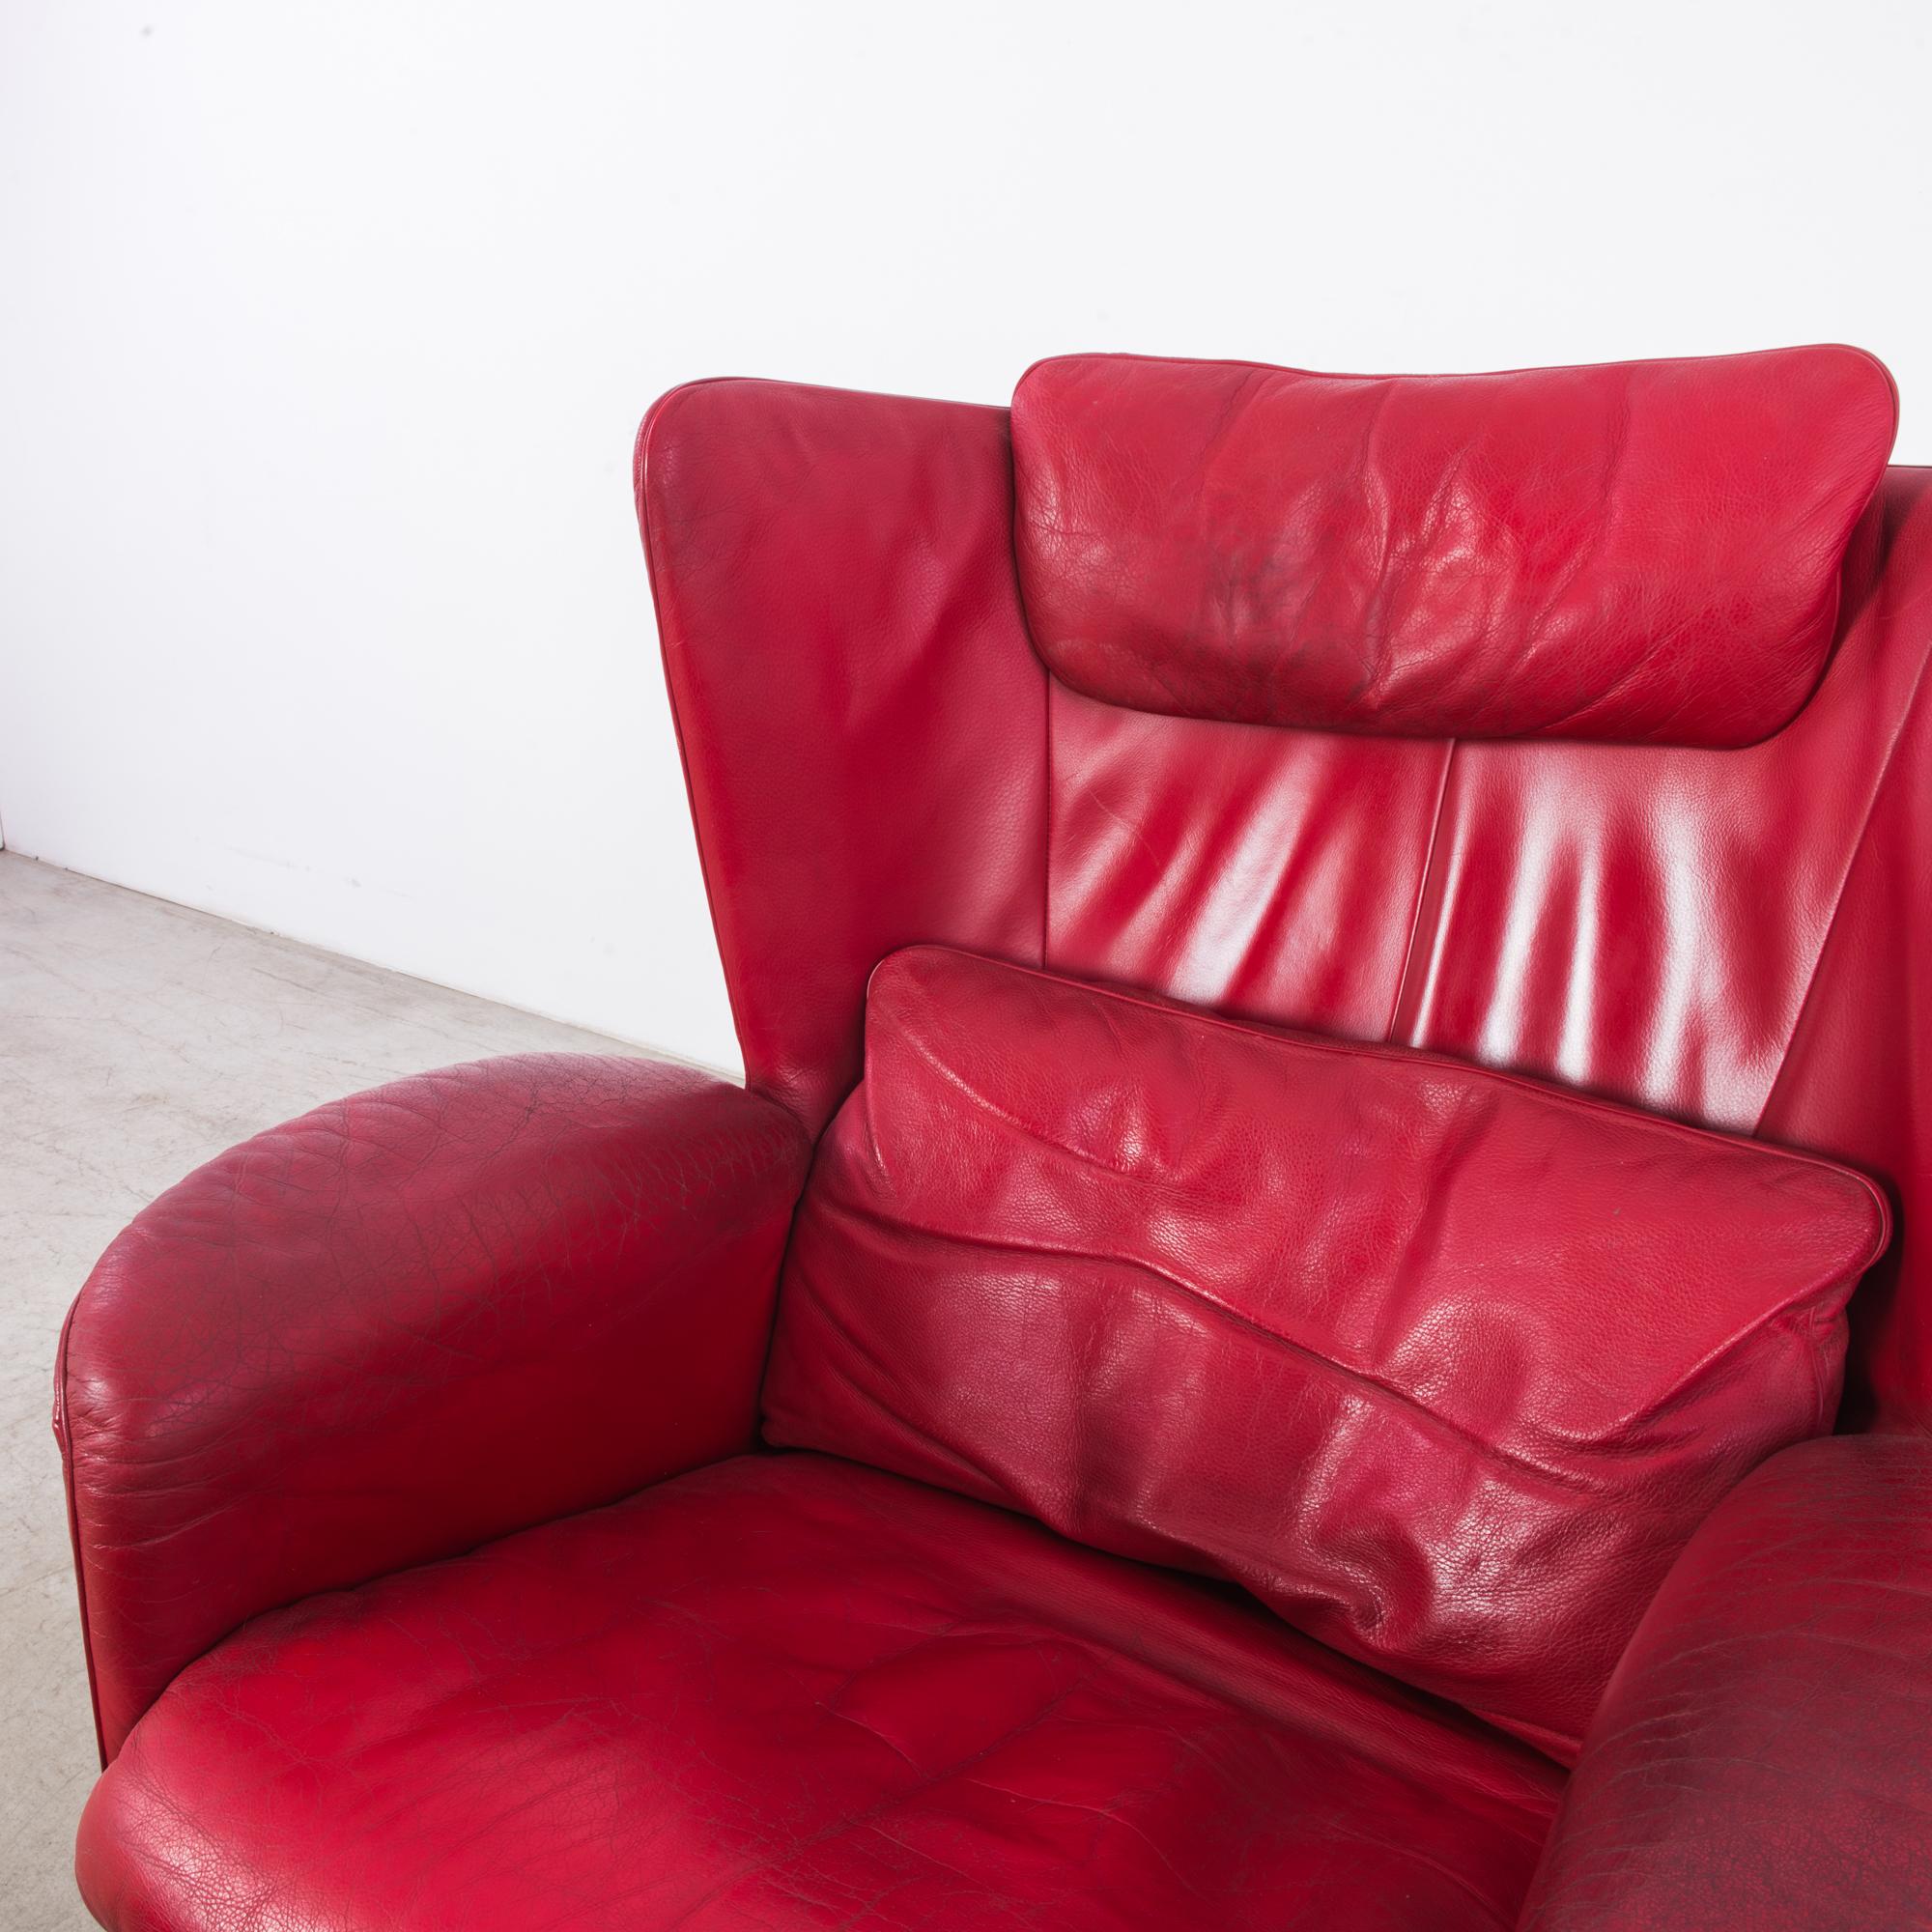 A leather armchair by Swiss furniture designers De Sede, circa 1980, with accompanying ottoman. The leather is a vivid crimson, with the silky finish of an expensive lipstick. The high wings and full curve of the backrest create a dramatic